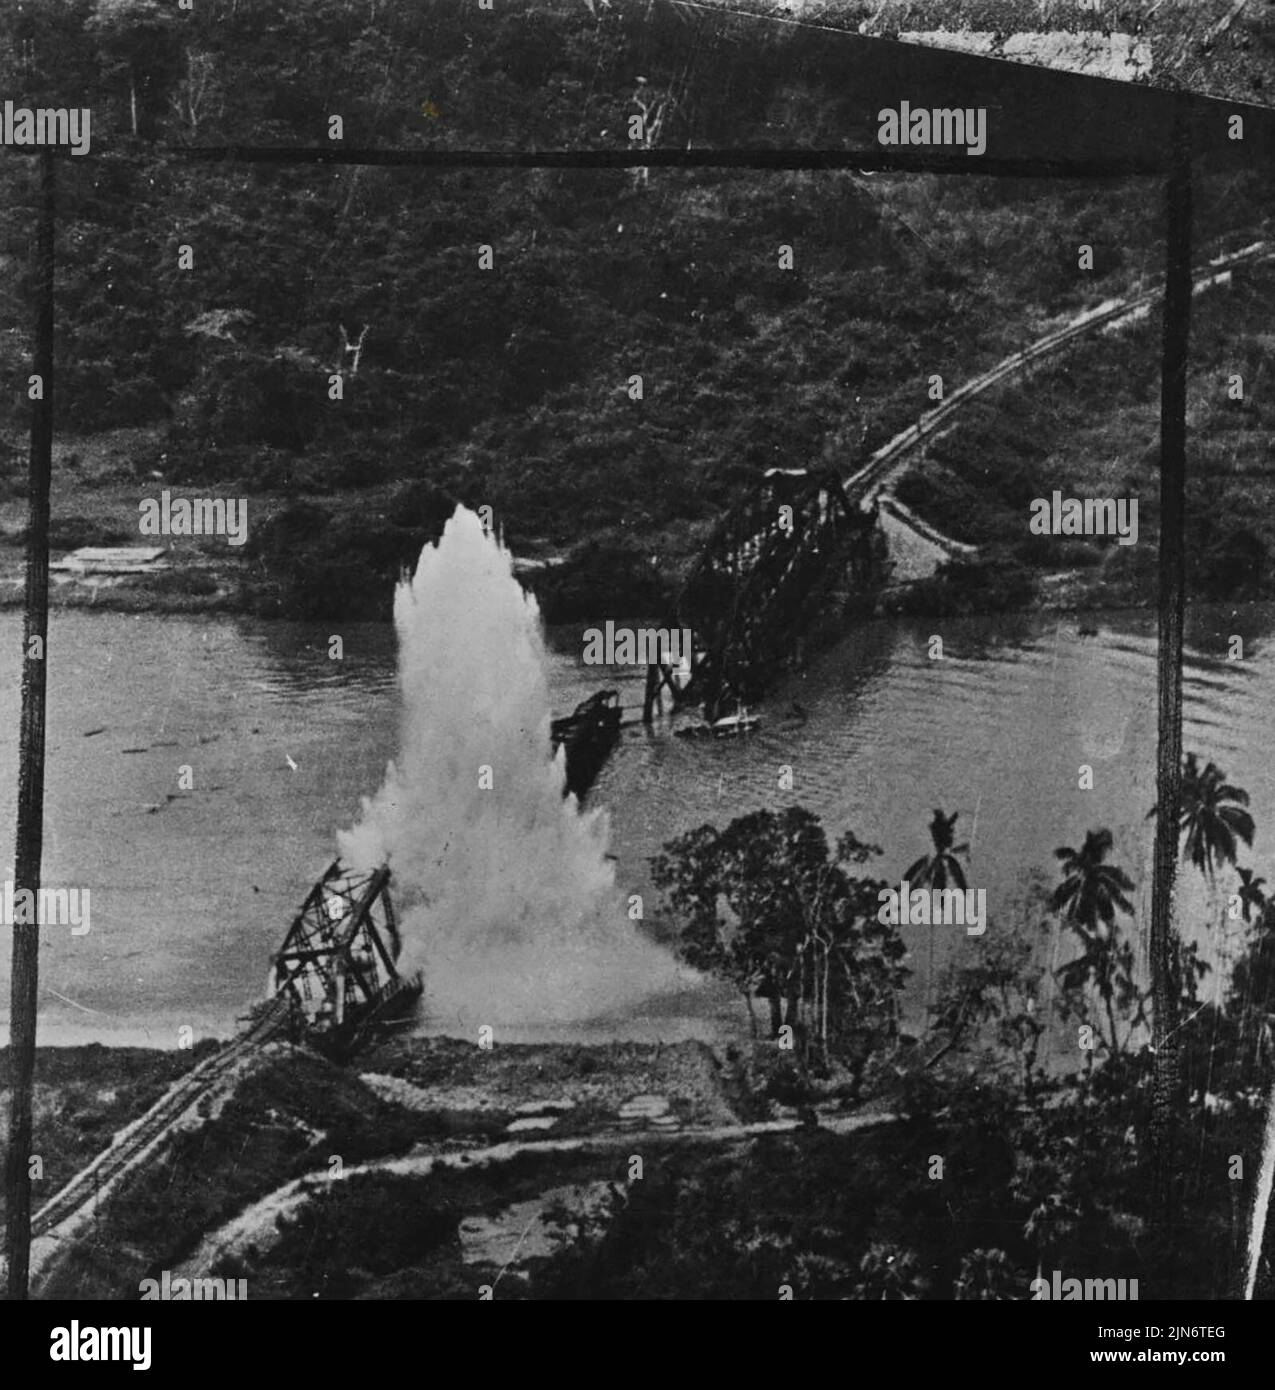 A low level oblique photograph taken from one of the attacking R.A.F. Liberators, shows a bomb exploding in the centre of the bridge.R.A.F. Heavies Strike In Malaya: In a round trip of nearly 2,500 miles from bases in India, R.A.F. Liberators of Strategic Air Force, Eastern Air Command, smashed a 600 foot three span girder bridge at Ban-Tam-Kam, on the Bangkok-Singapore railway. The bridge, 600 miles north of Singapore, had been hit before, but the new strike has demolished it - denying the enemy the use of a vital supply link for their armies resisting in Lower Burma and Siam. July 09, 1945. Stock Photo